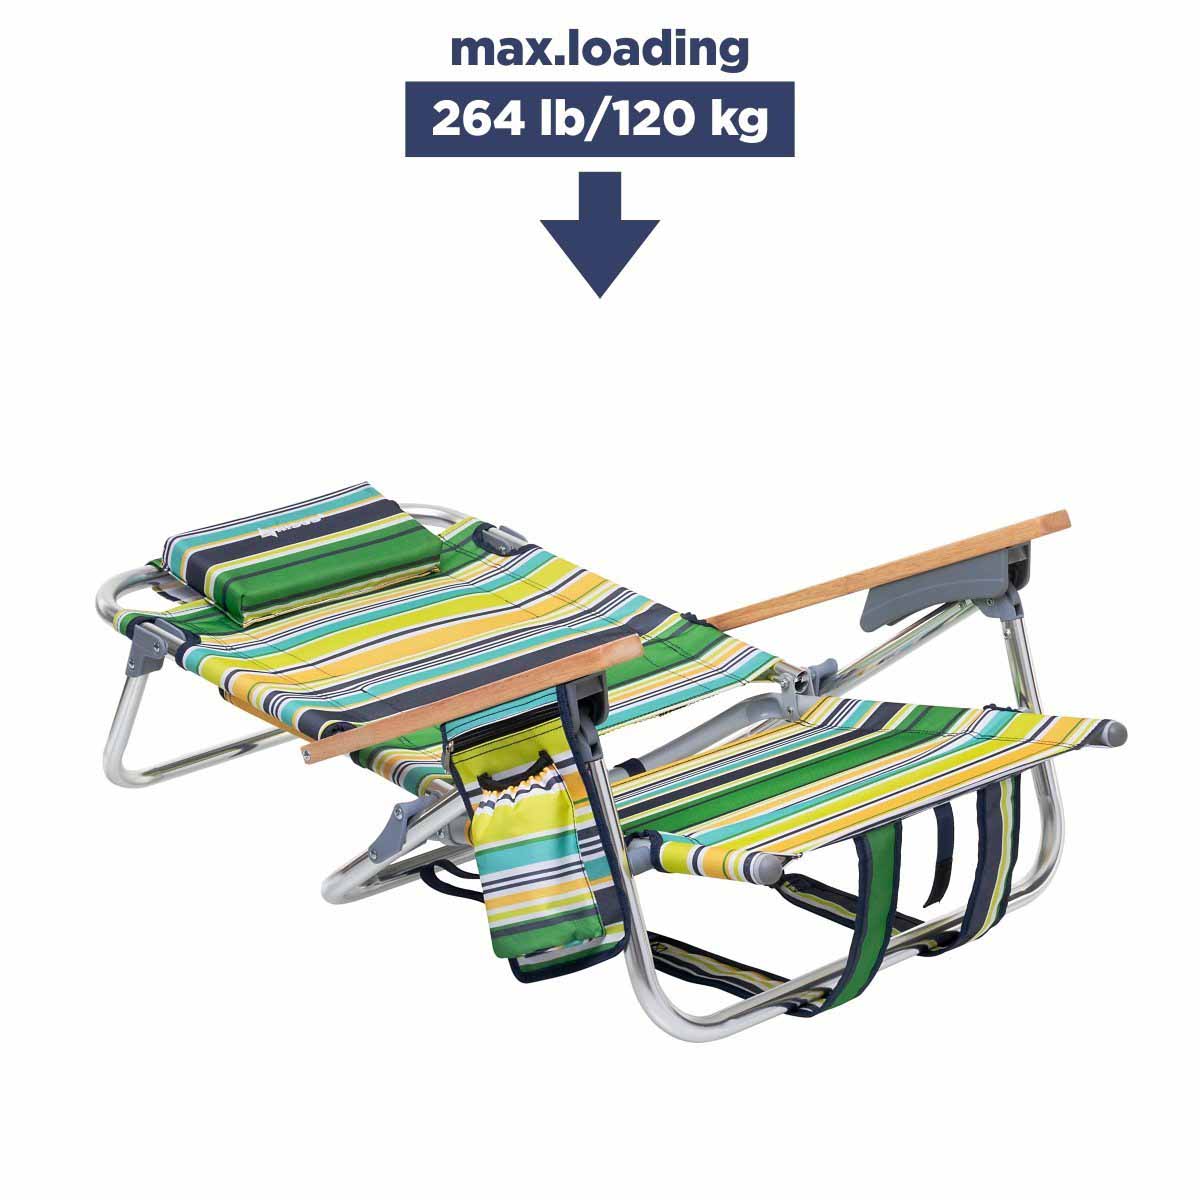 Backpack Beach Chair with Cup Holder max loading is 264 lbs